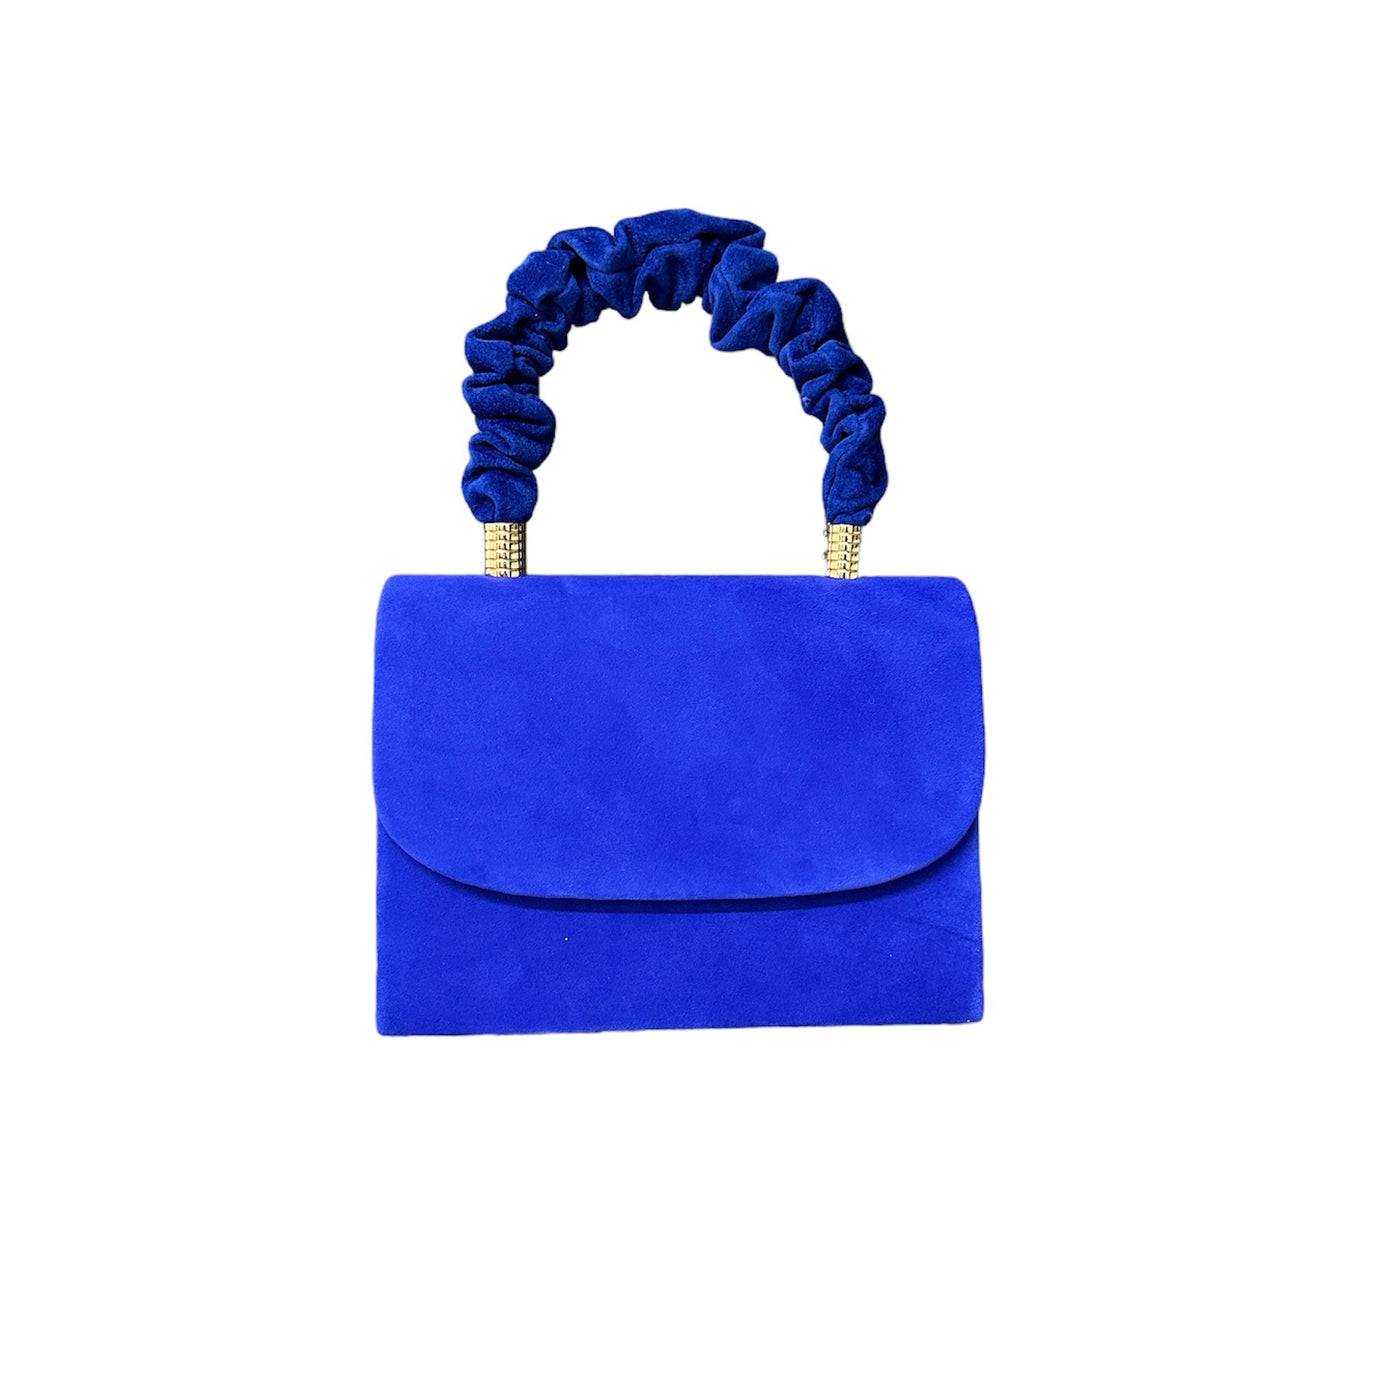 Various Colours - Handbag with Rouched Handle & Chain Strap